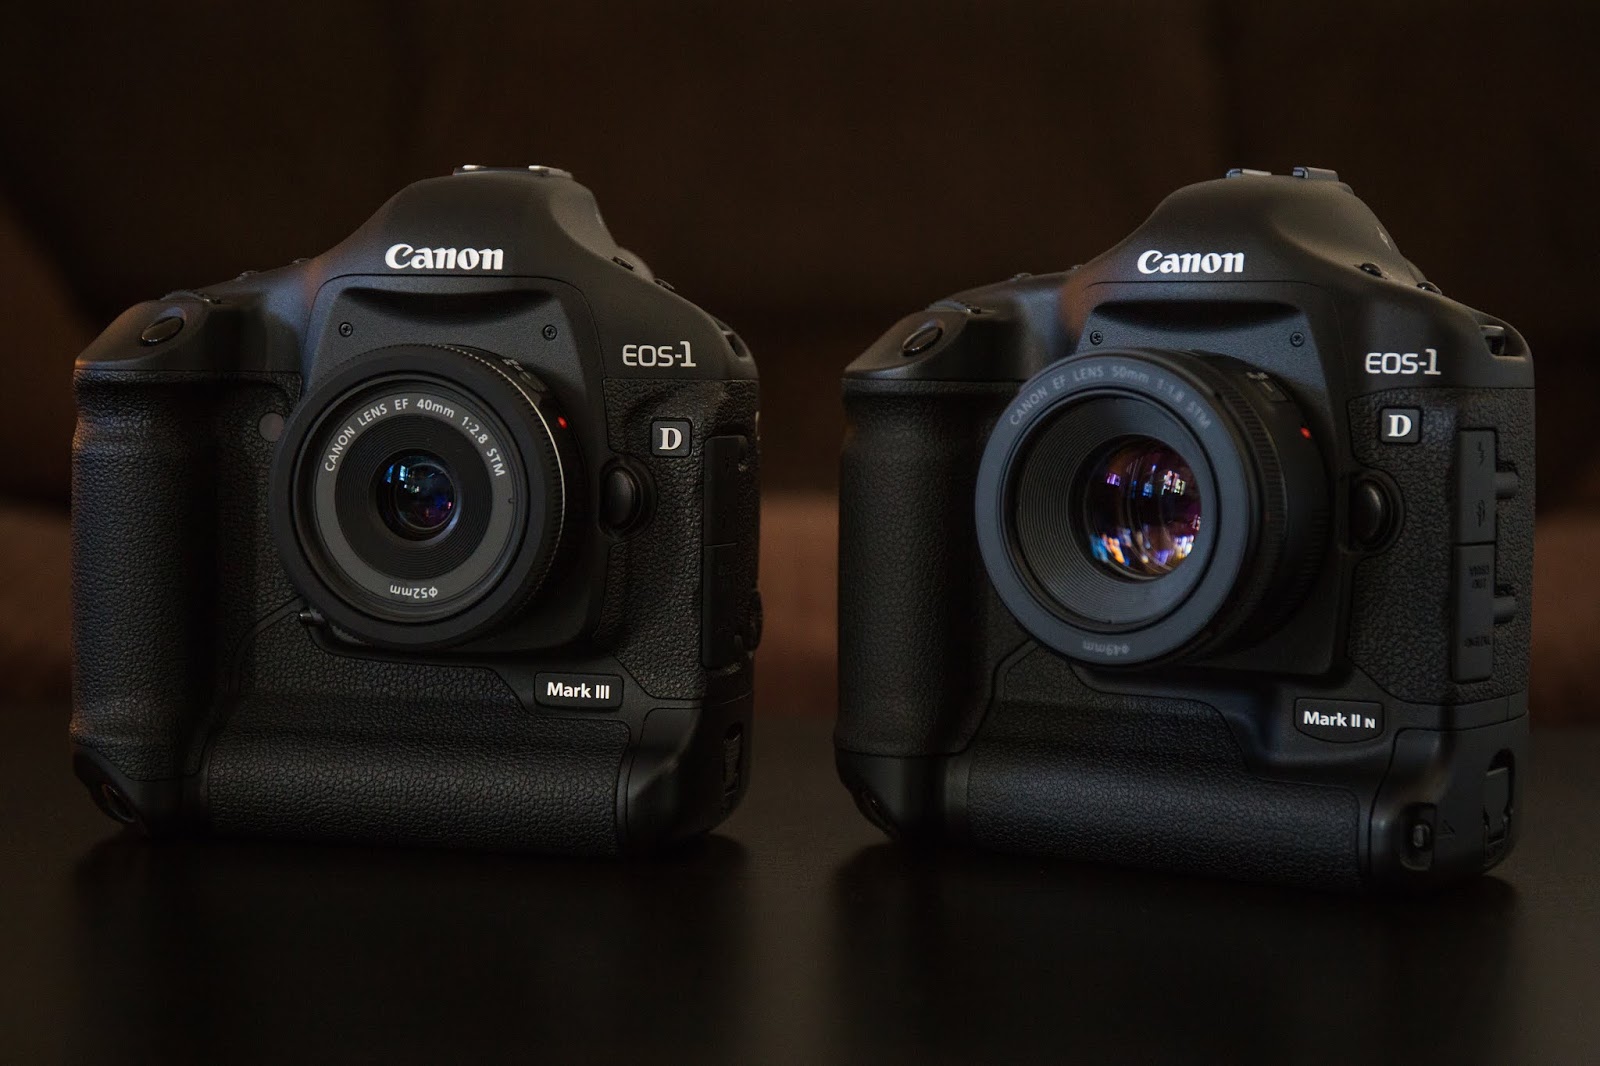 segment Irrigatie last Guest Post: Canon EOS-1D Mark III and EOS-1D Mark II N - Two Budget  Professional Camera Options